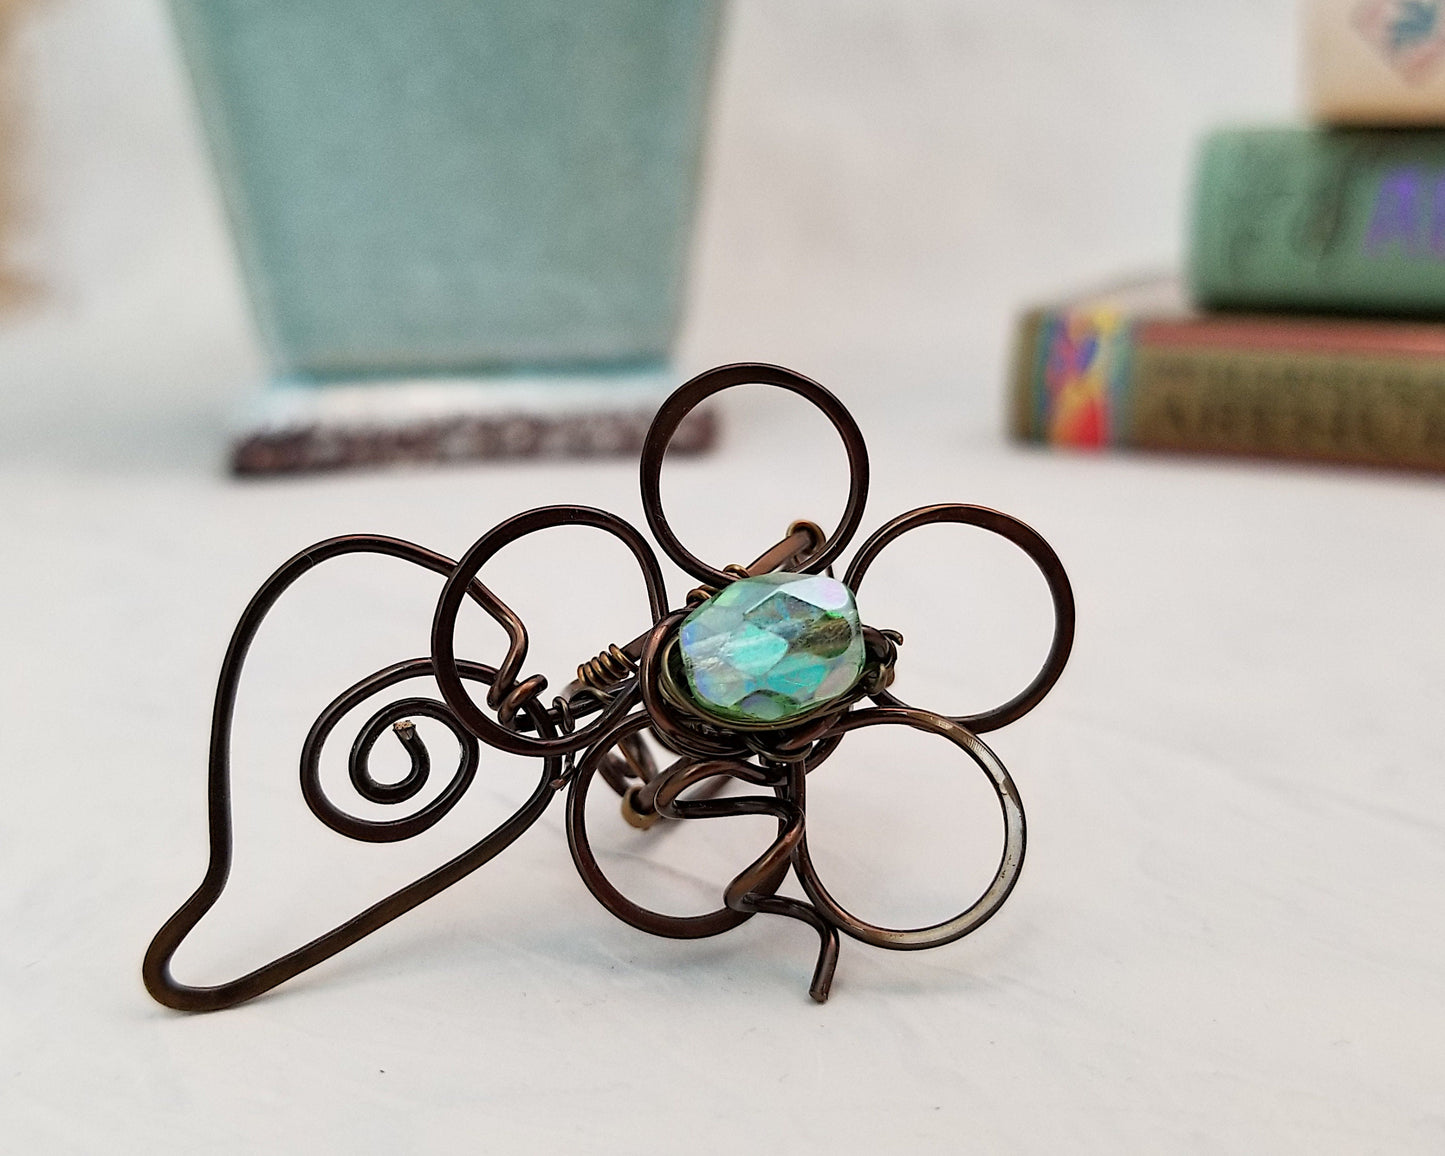 Statement Ring with Hammered Wire Flower and Leaf Boho Style OOAK Handmade Green Adjustable